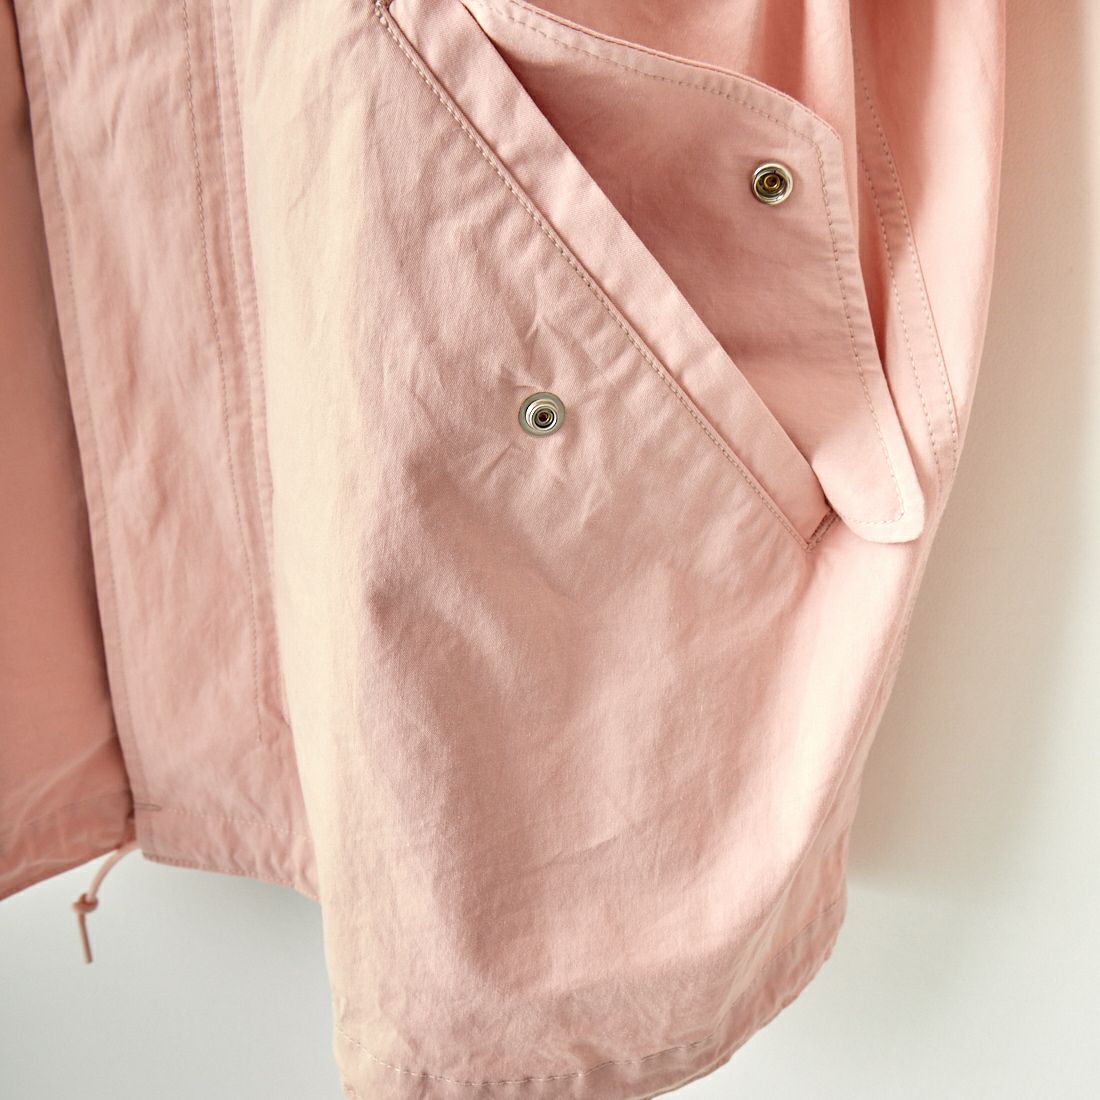 Jeans Factory Clothes [ジーンズファクトリークローズ] ショートモッズパーカー [IN1-CT-3] PINK